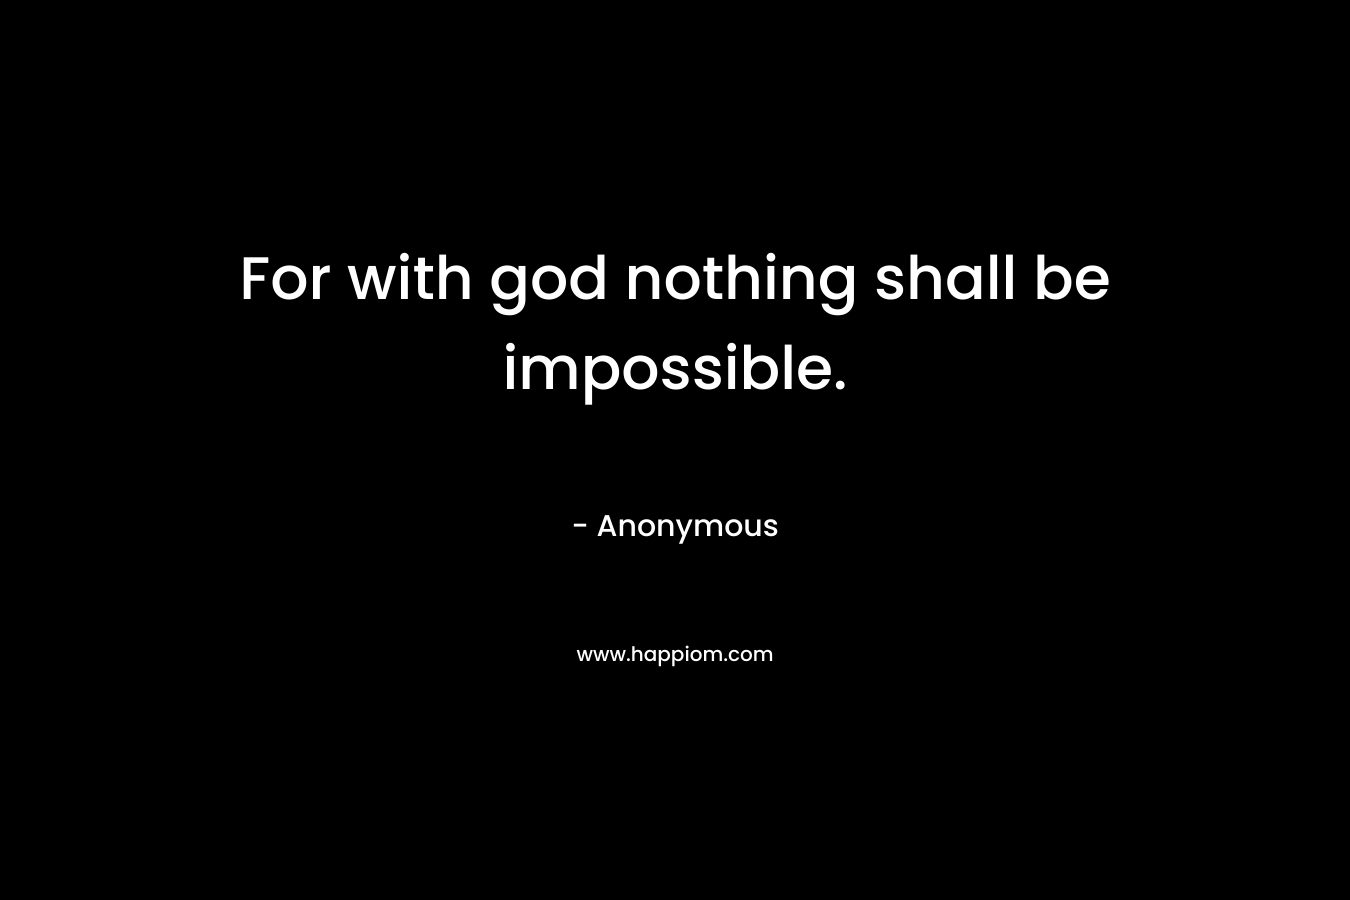 For with god nothing shall be impossible.